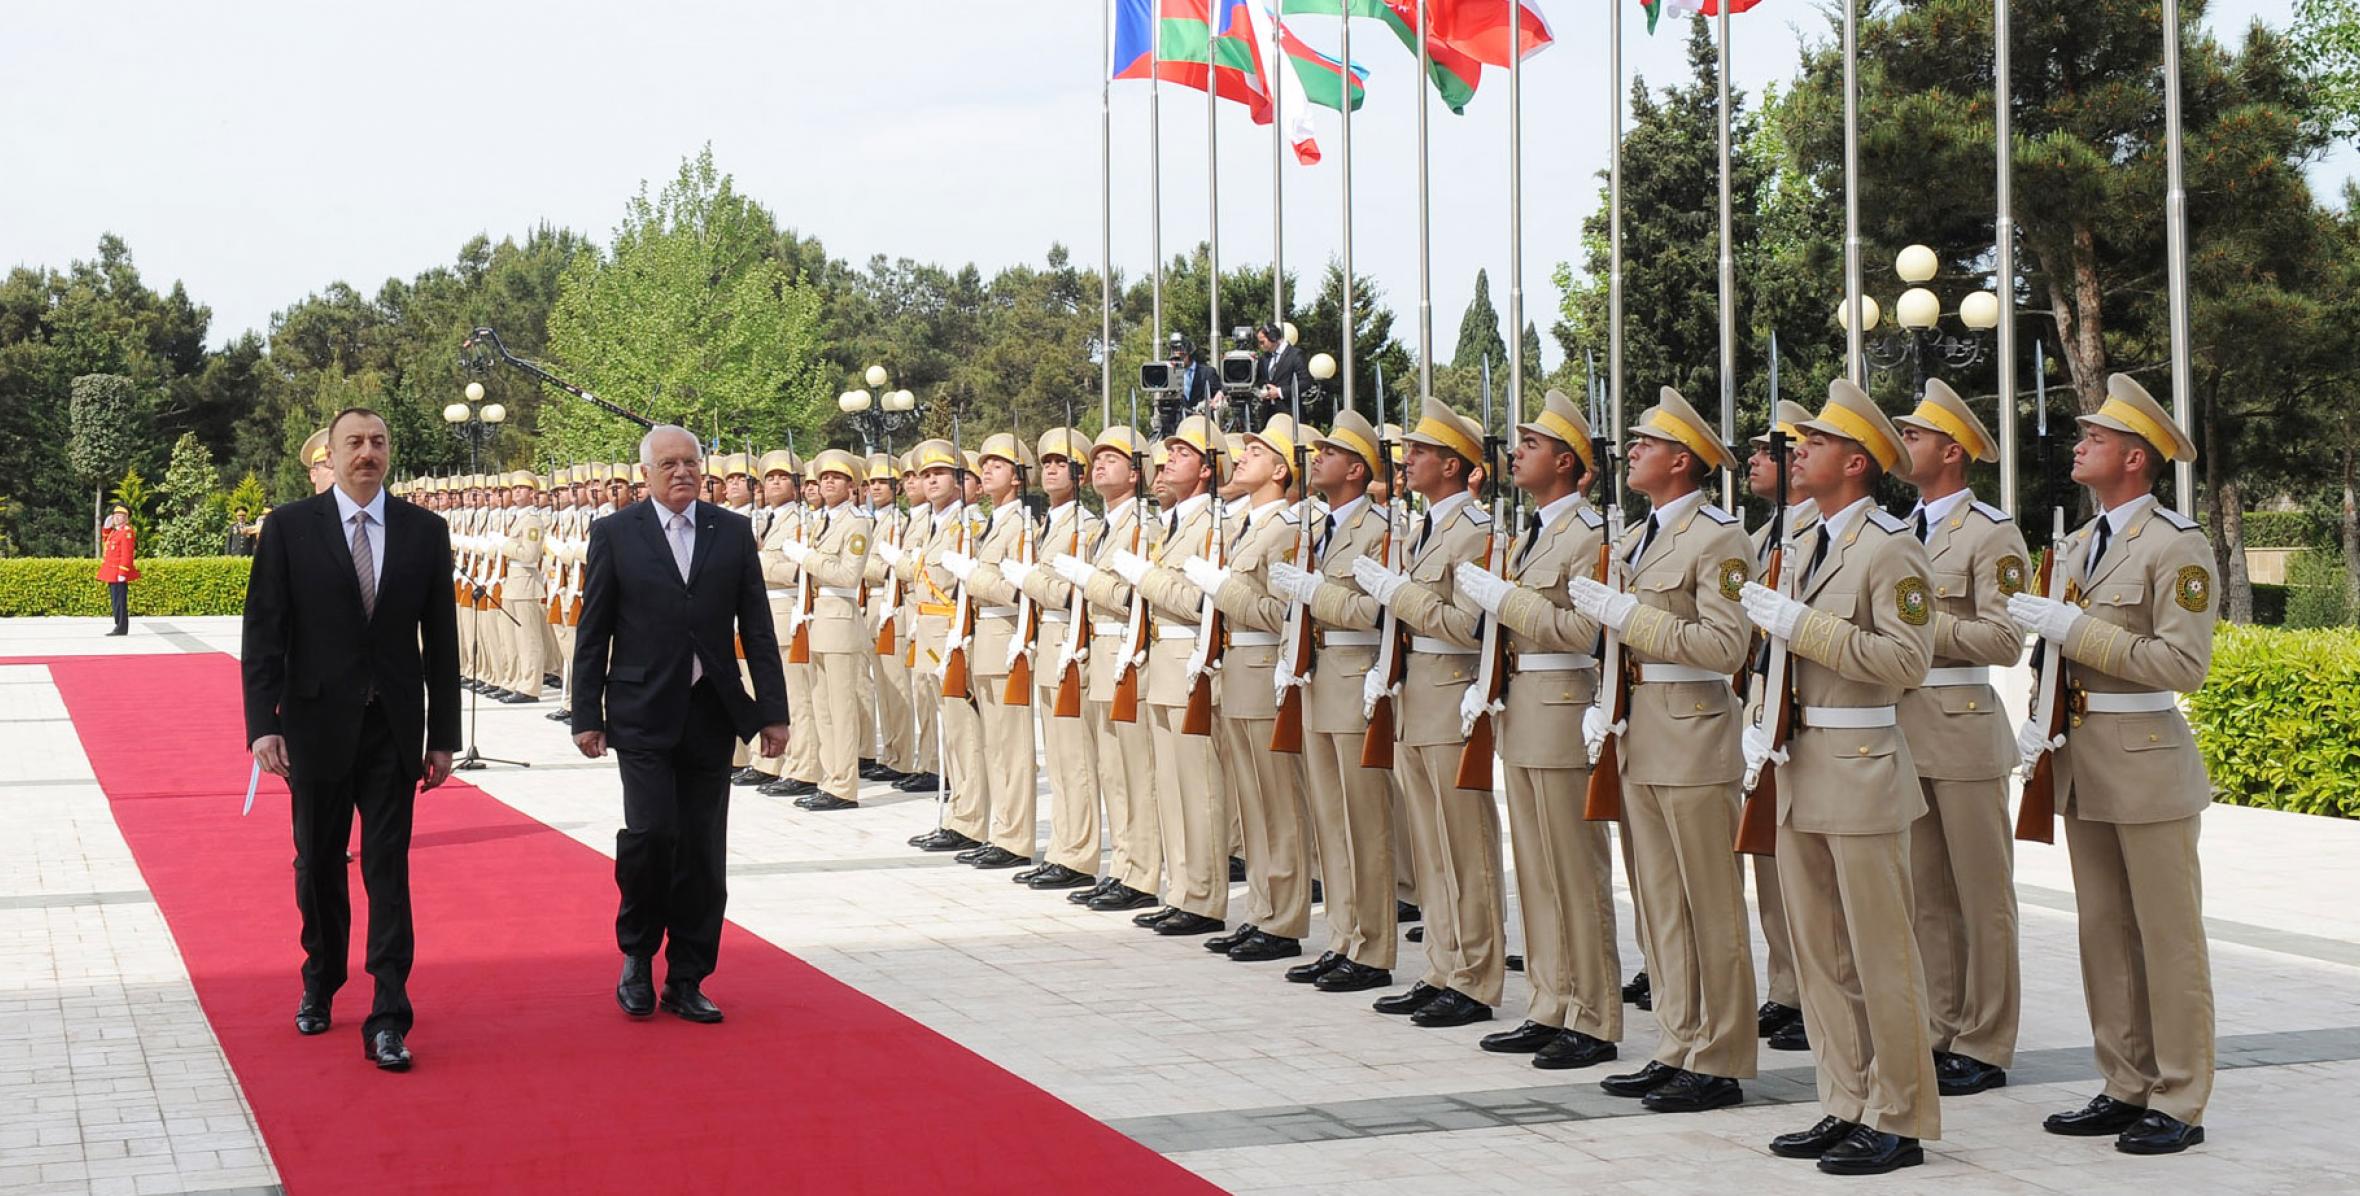 Official welcoming ceremony of Václav Klaus, President of the Czech Republic